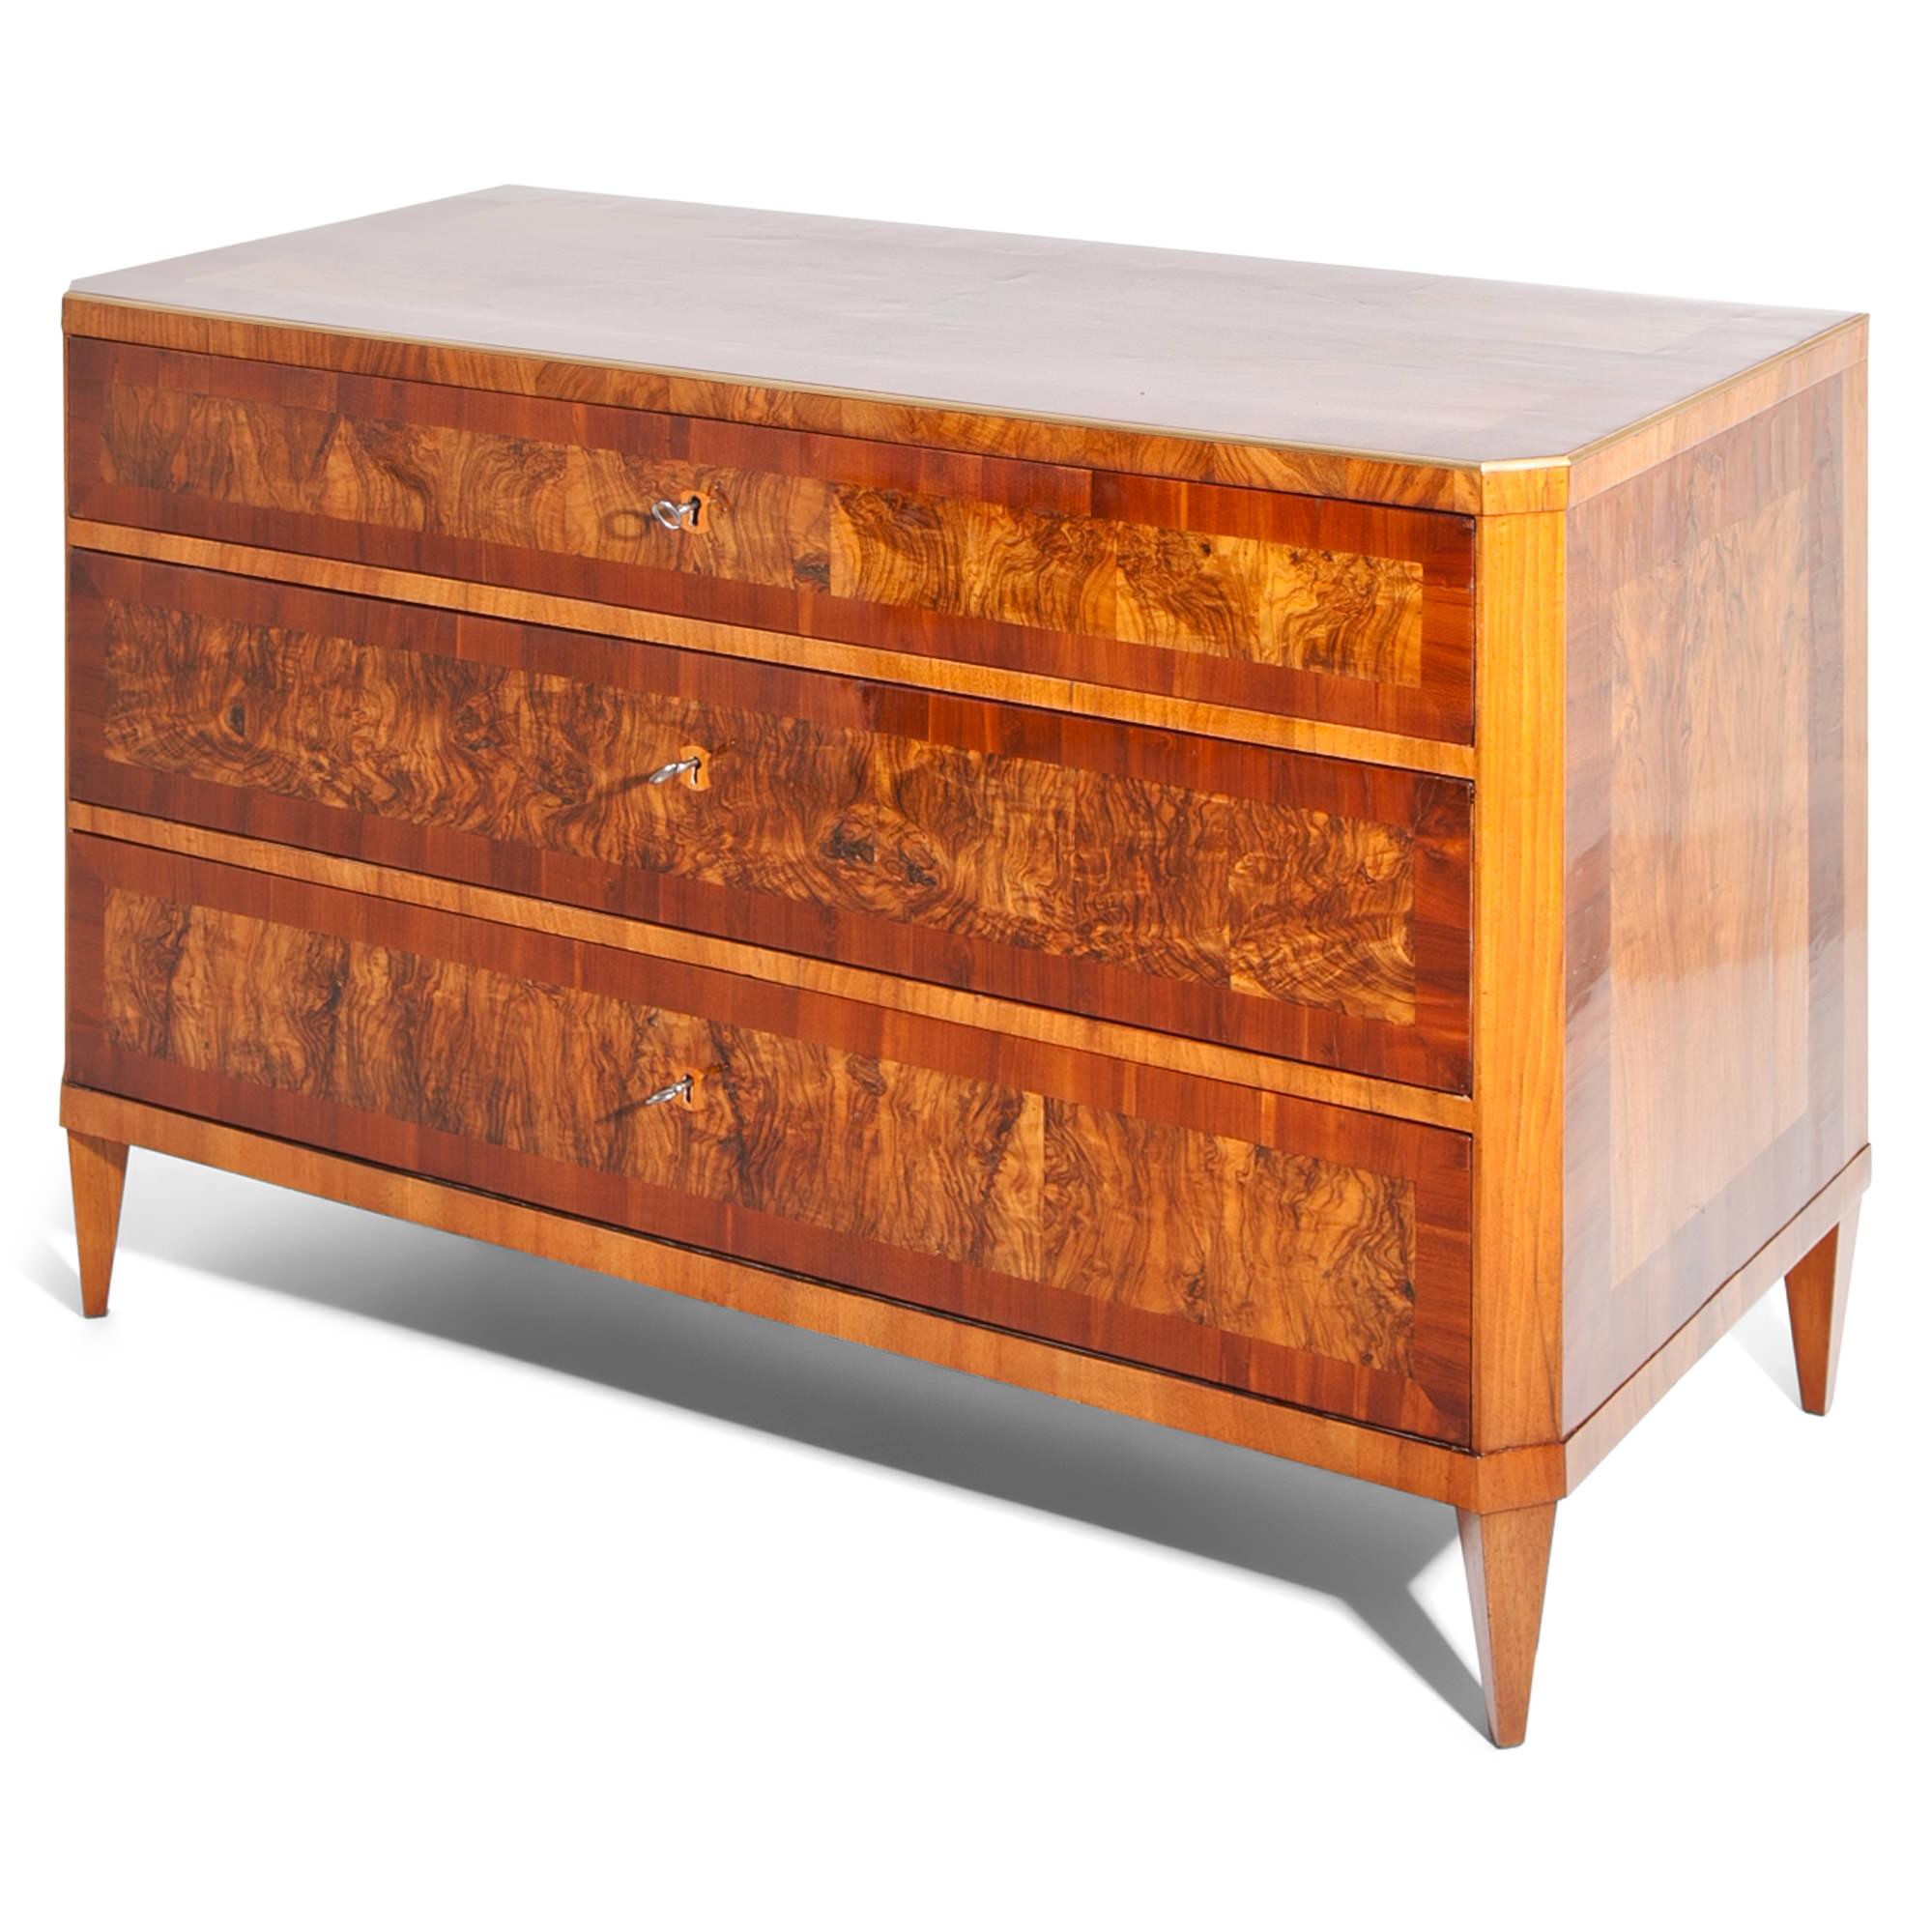 Three-drawered neoclassical chest of drawers with beveled corners, standing on tapered feet. The upper edge is decorated with a brass strip. The front and sides are veneered in burl wood and walnut. The chest was professionally refurbished and